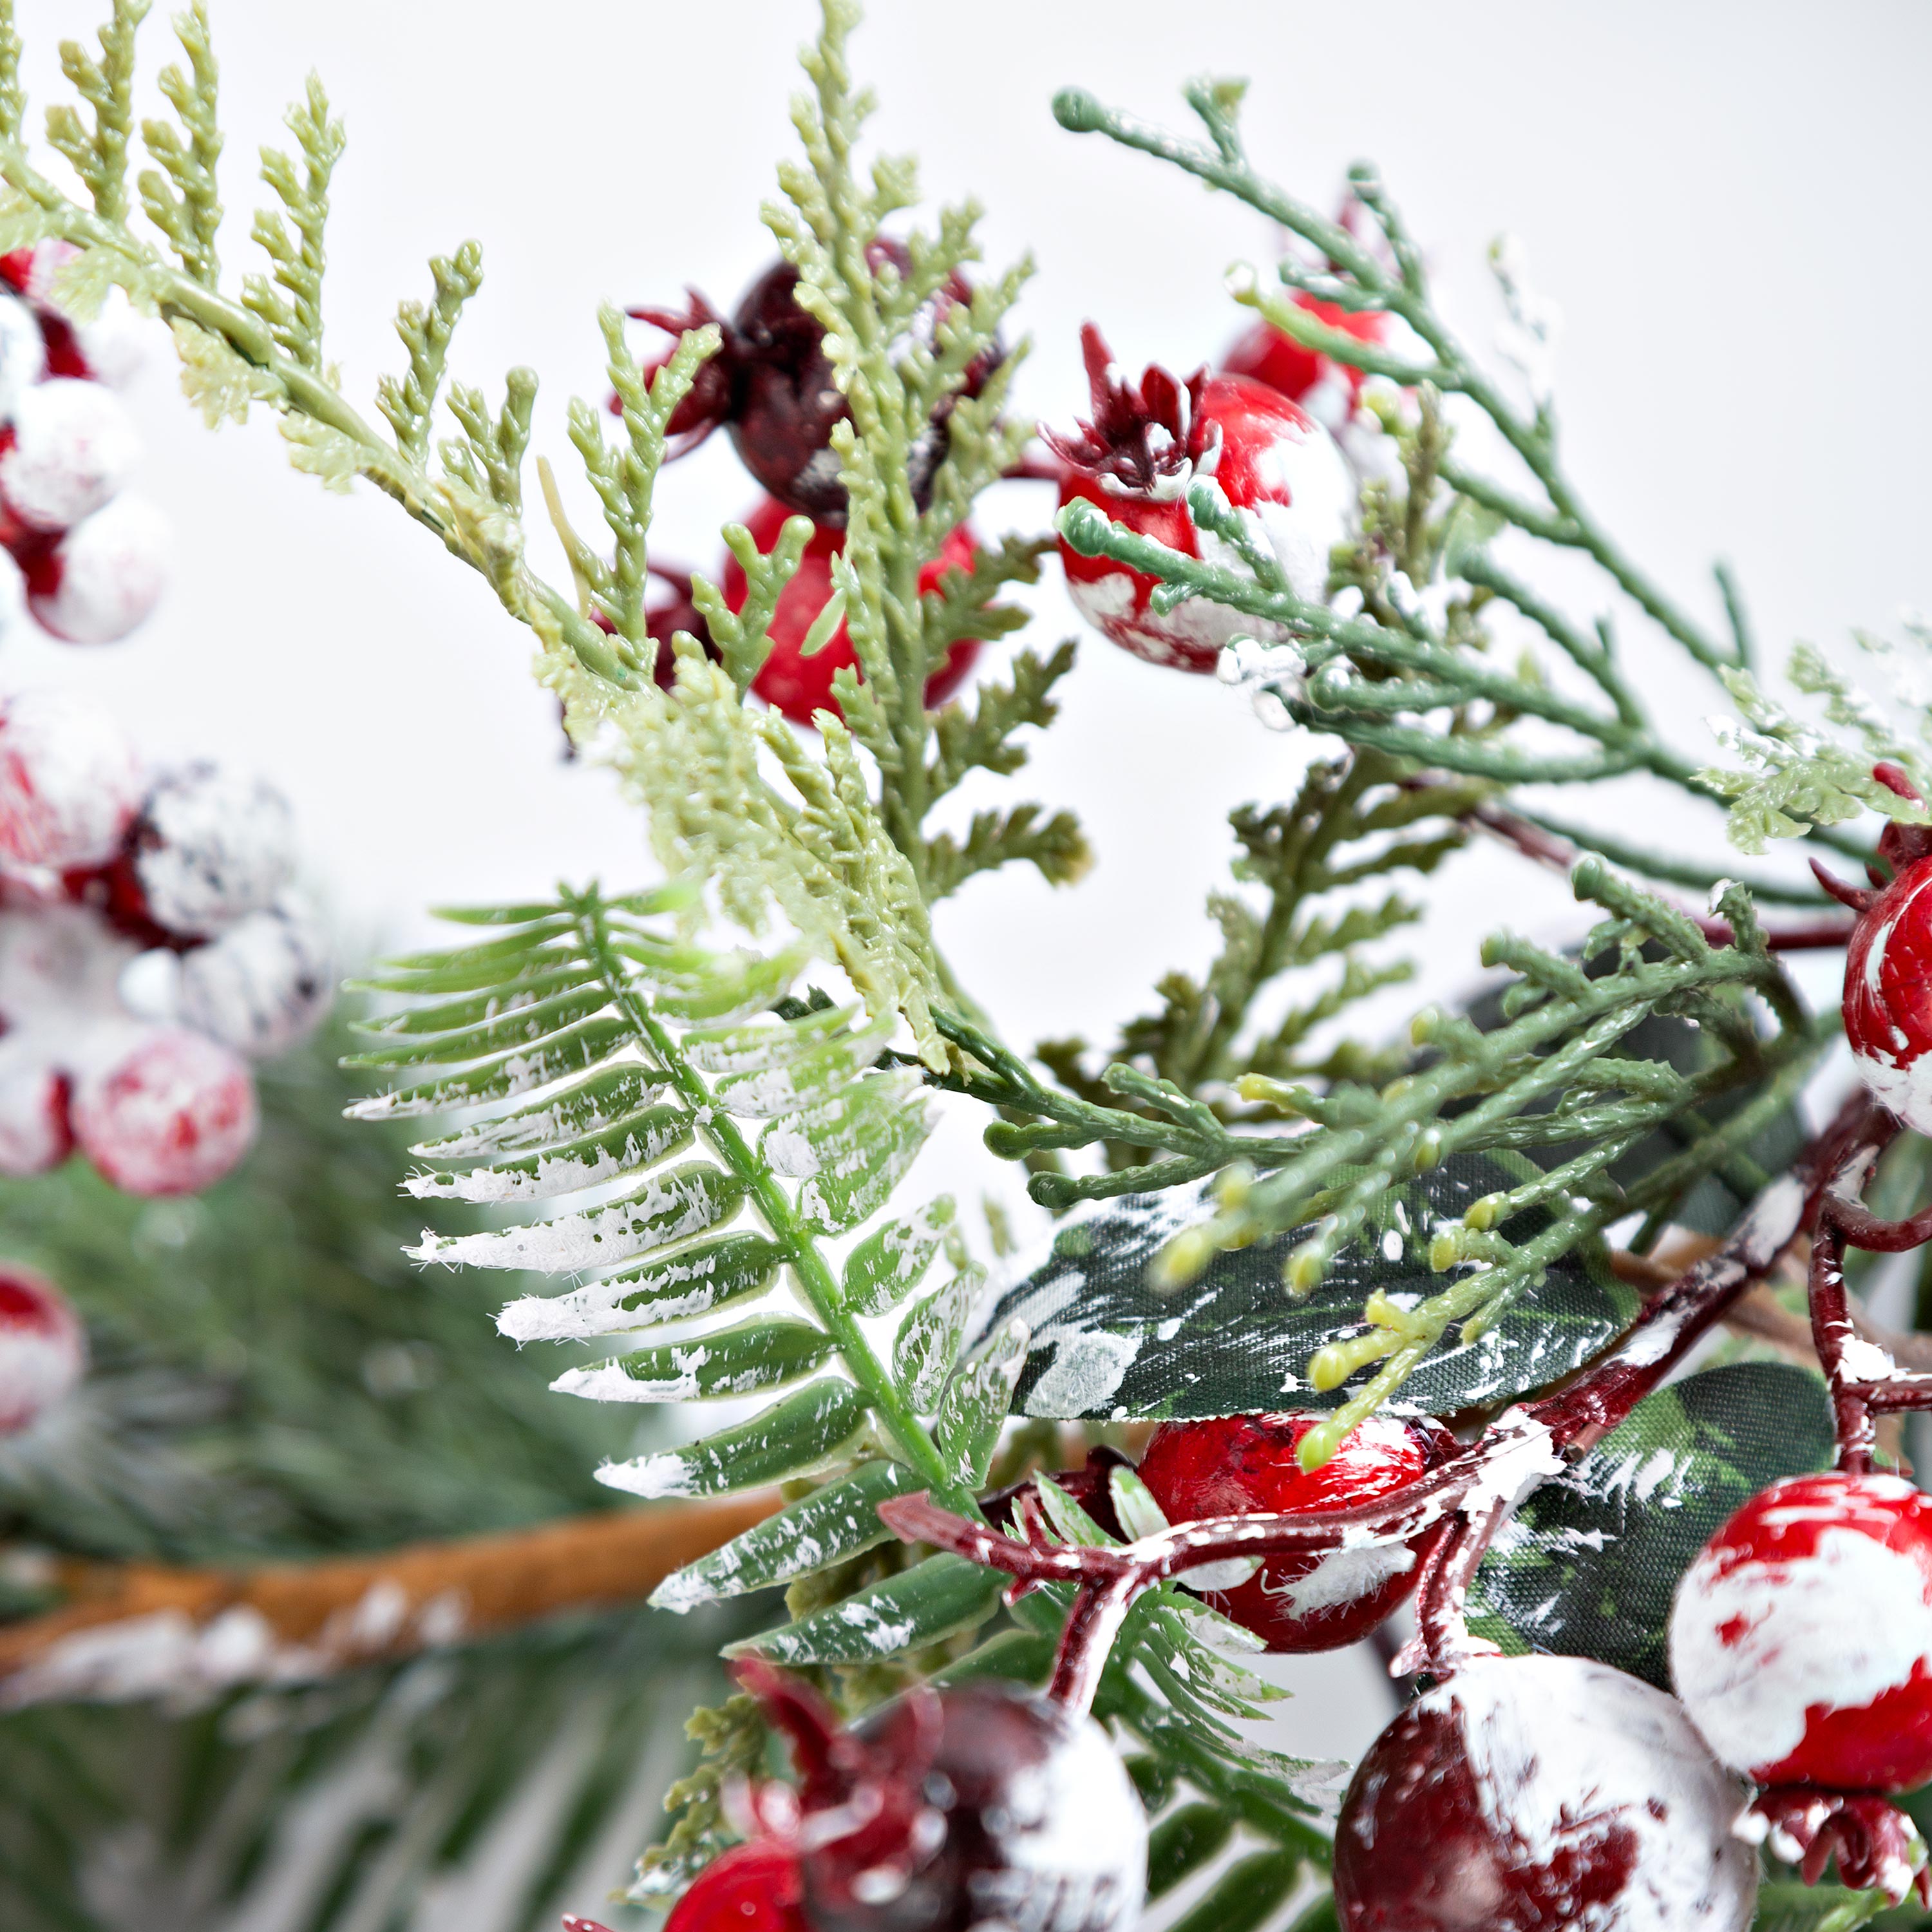 Edinburg Frosted Berries and Pine Boughs Holiday Garland